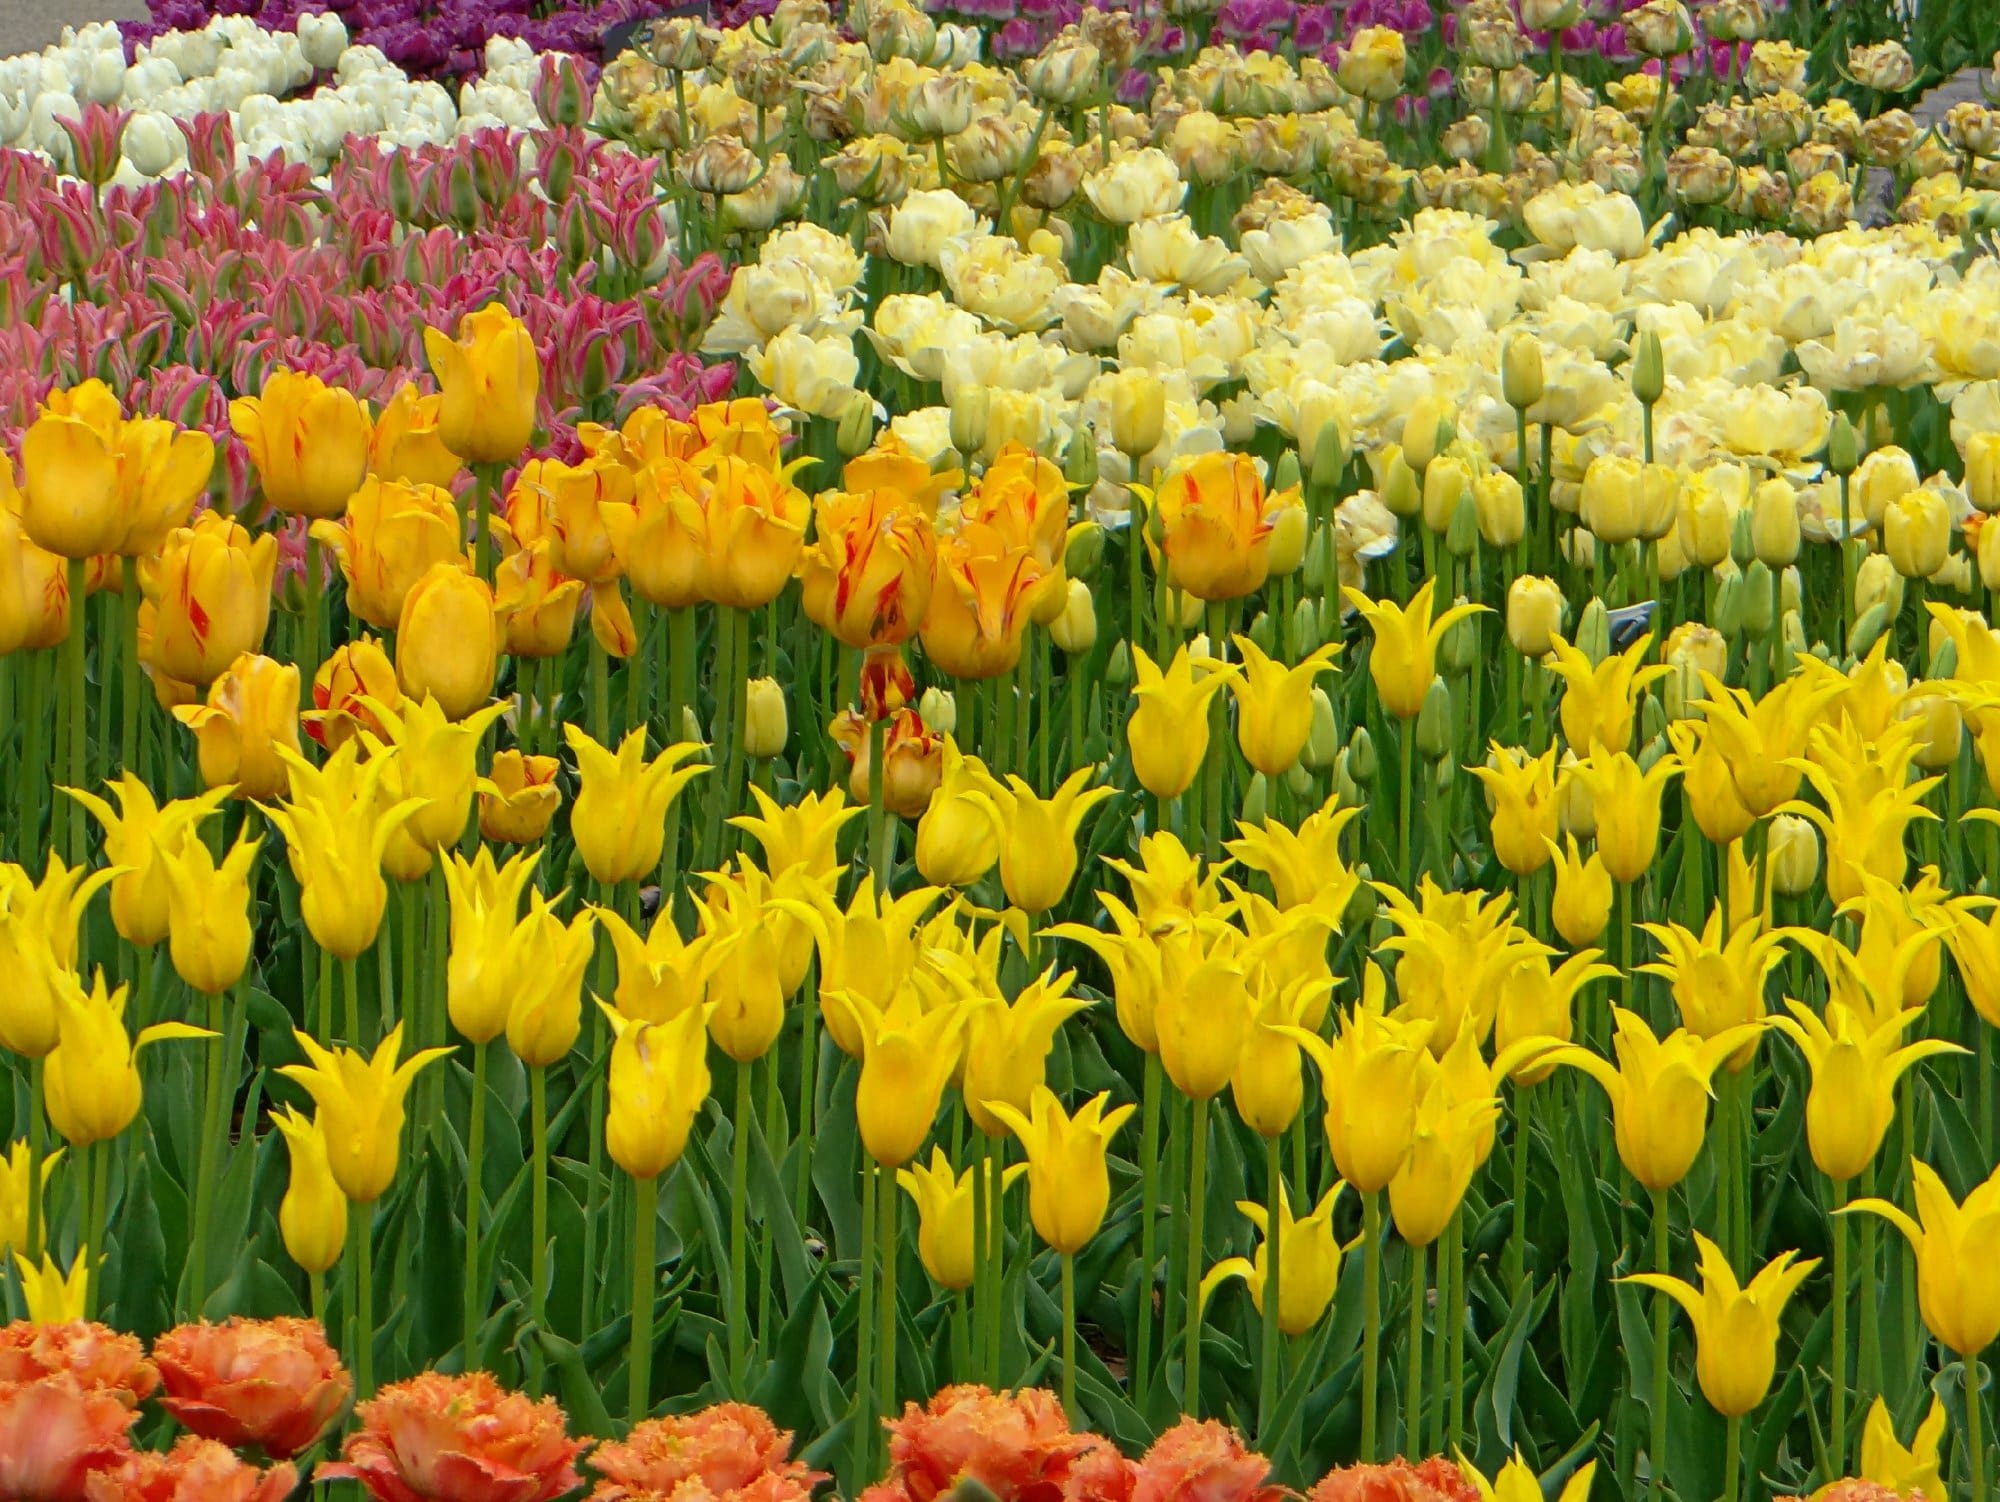 Fall Planted Bulbs for Spectacular Spring Color - Pahl's Market - Apple Valley, MN